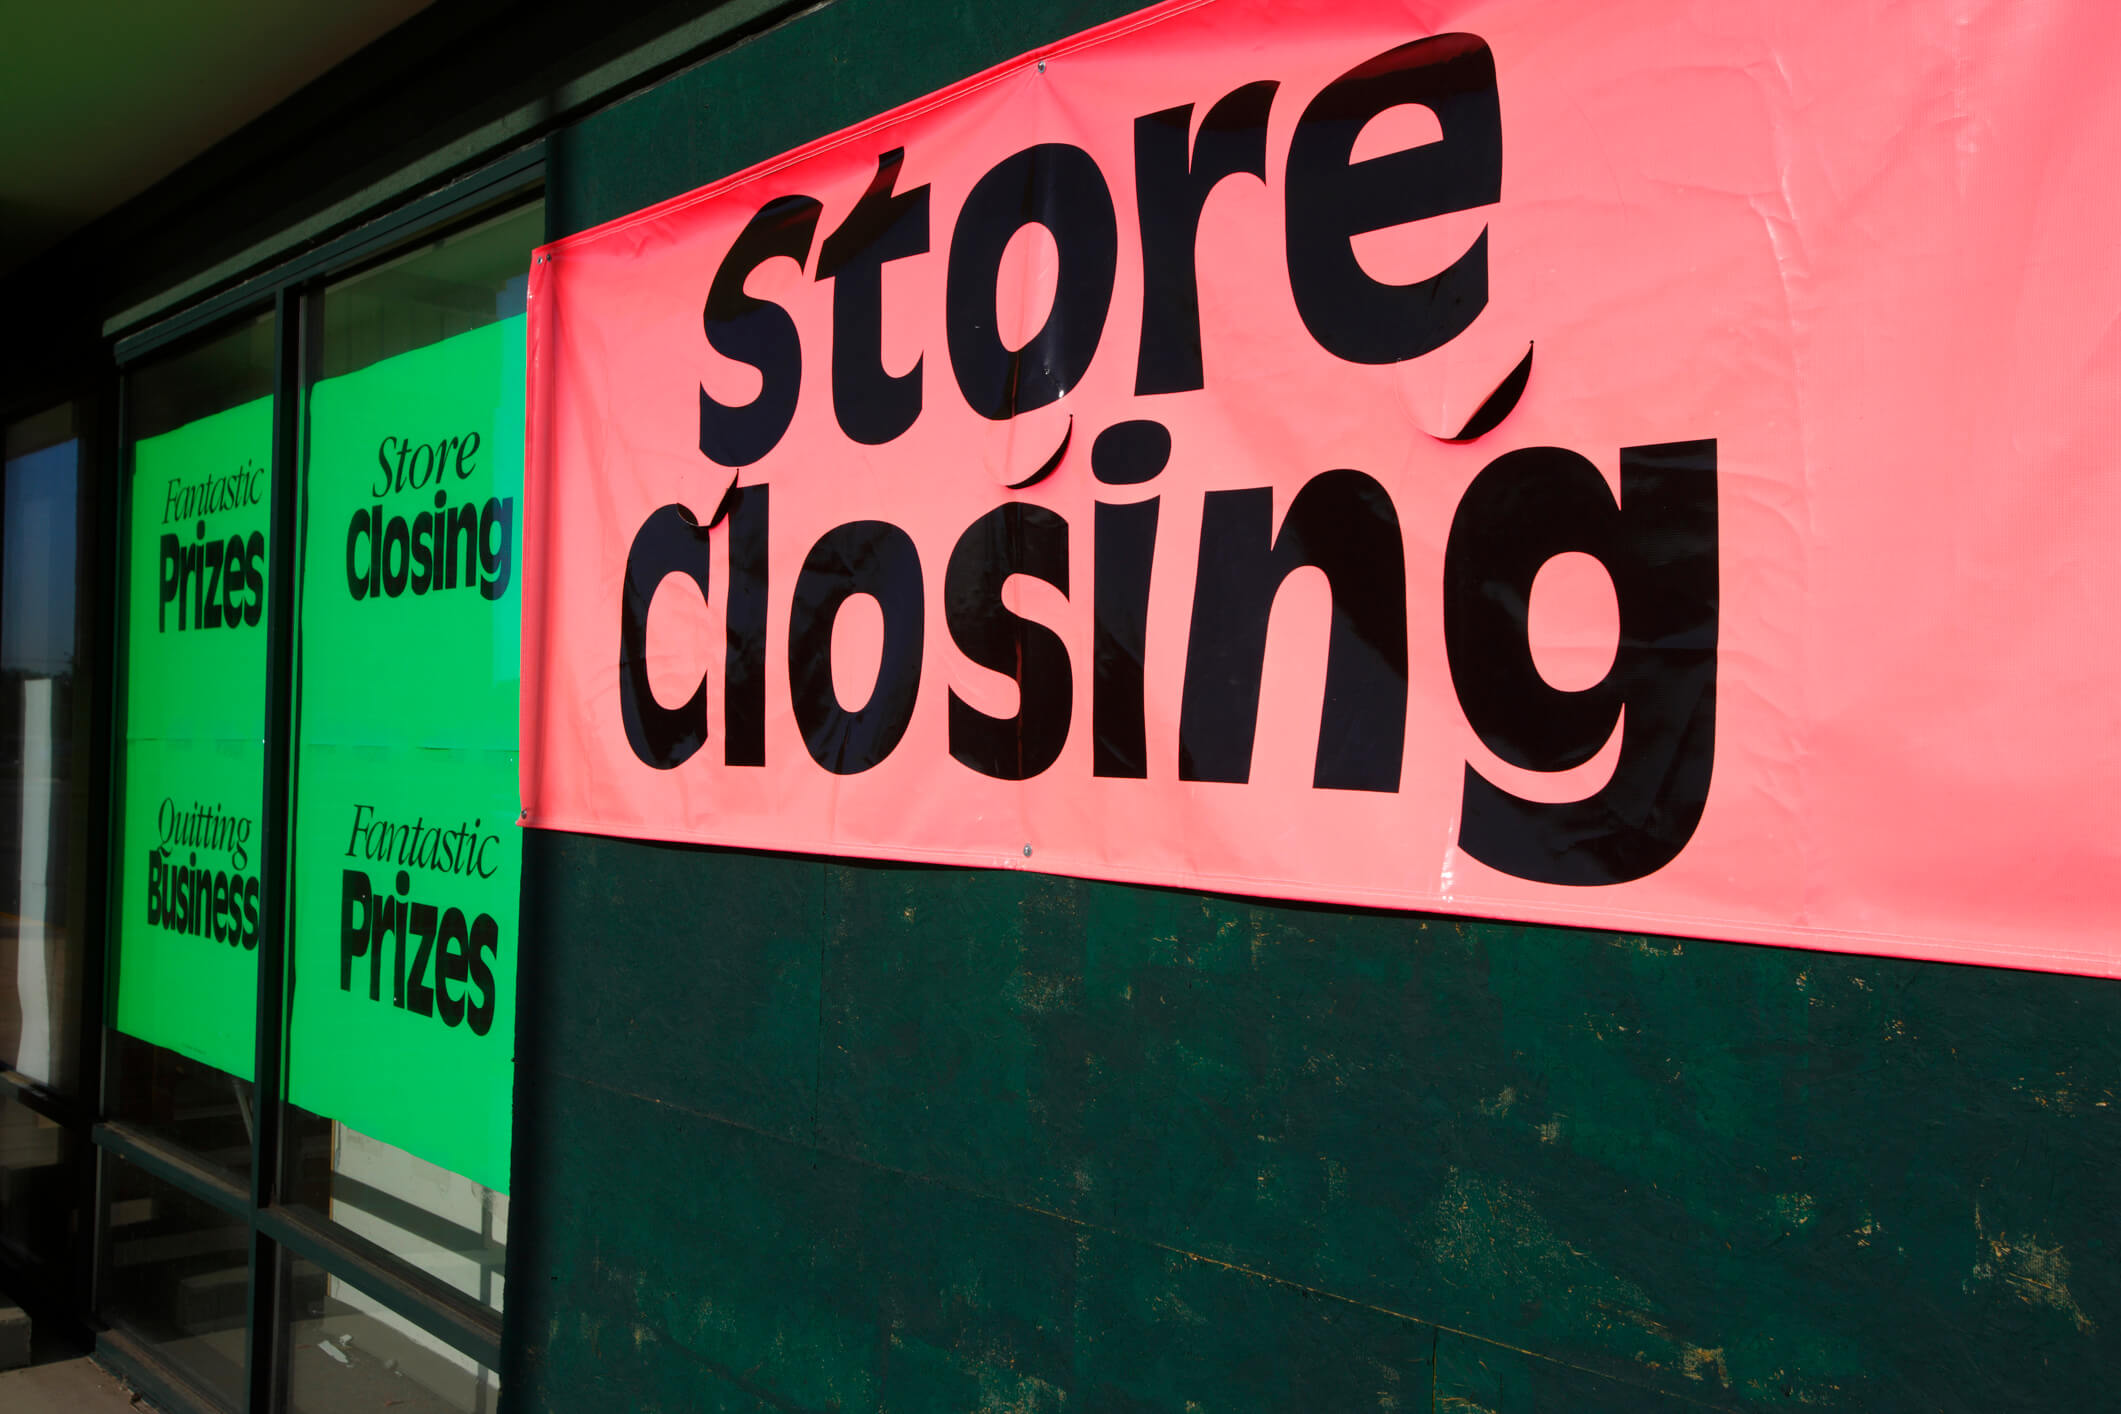 Brick and Mortar Businesses Closed - Complete Controller